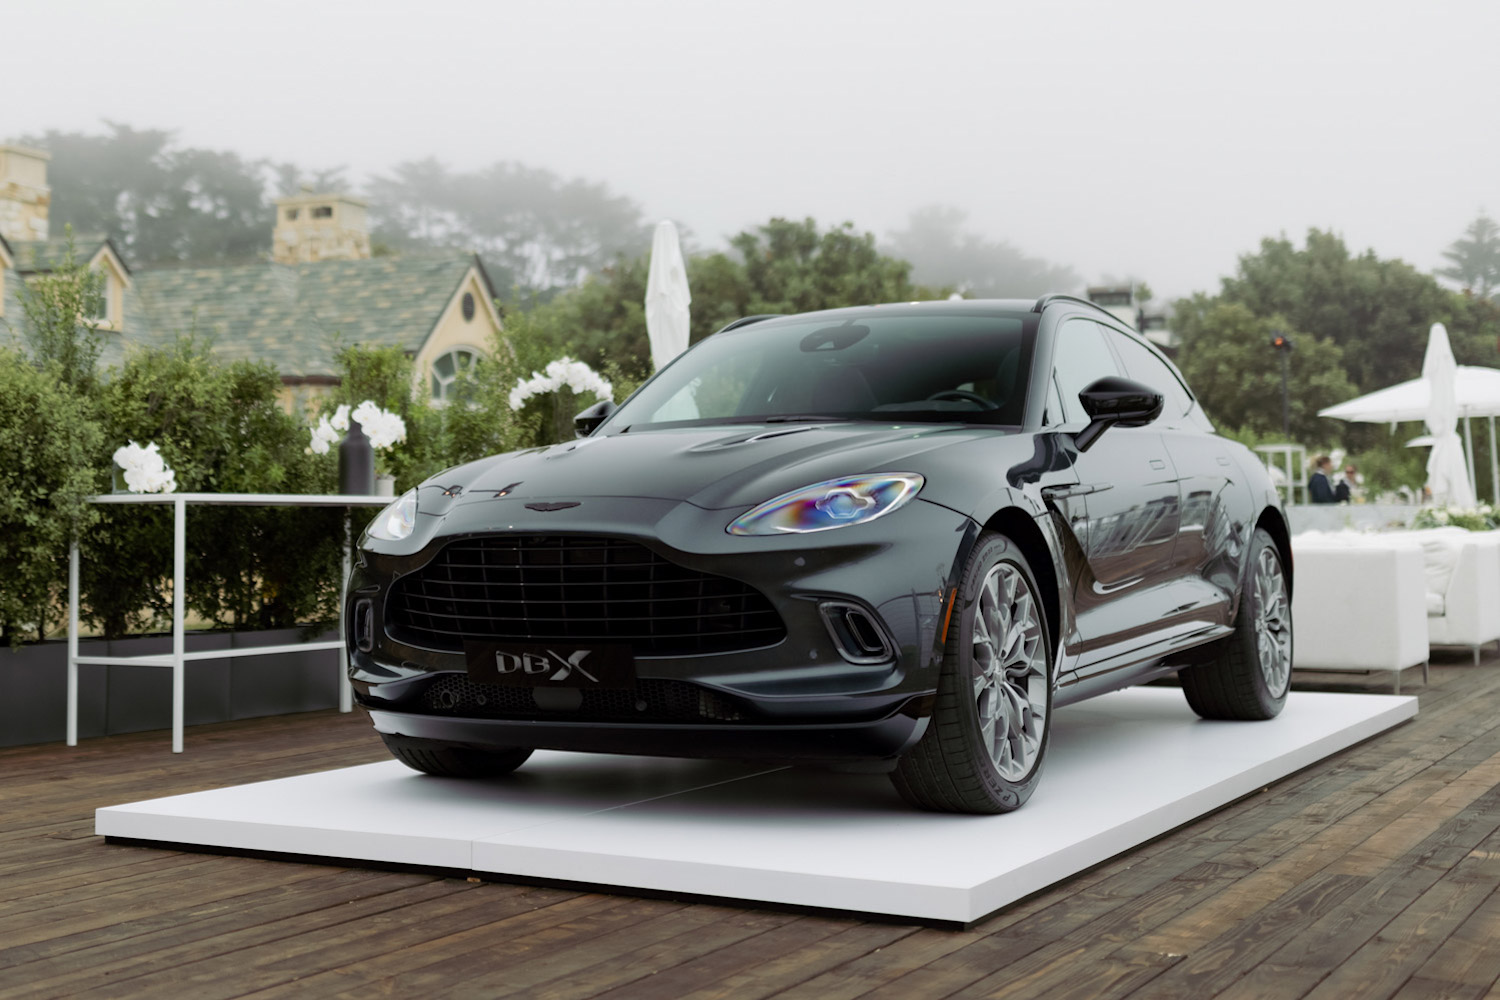 Aston Martin to reveal two new models at Pebble Beach